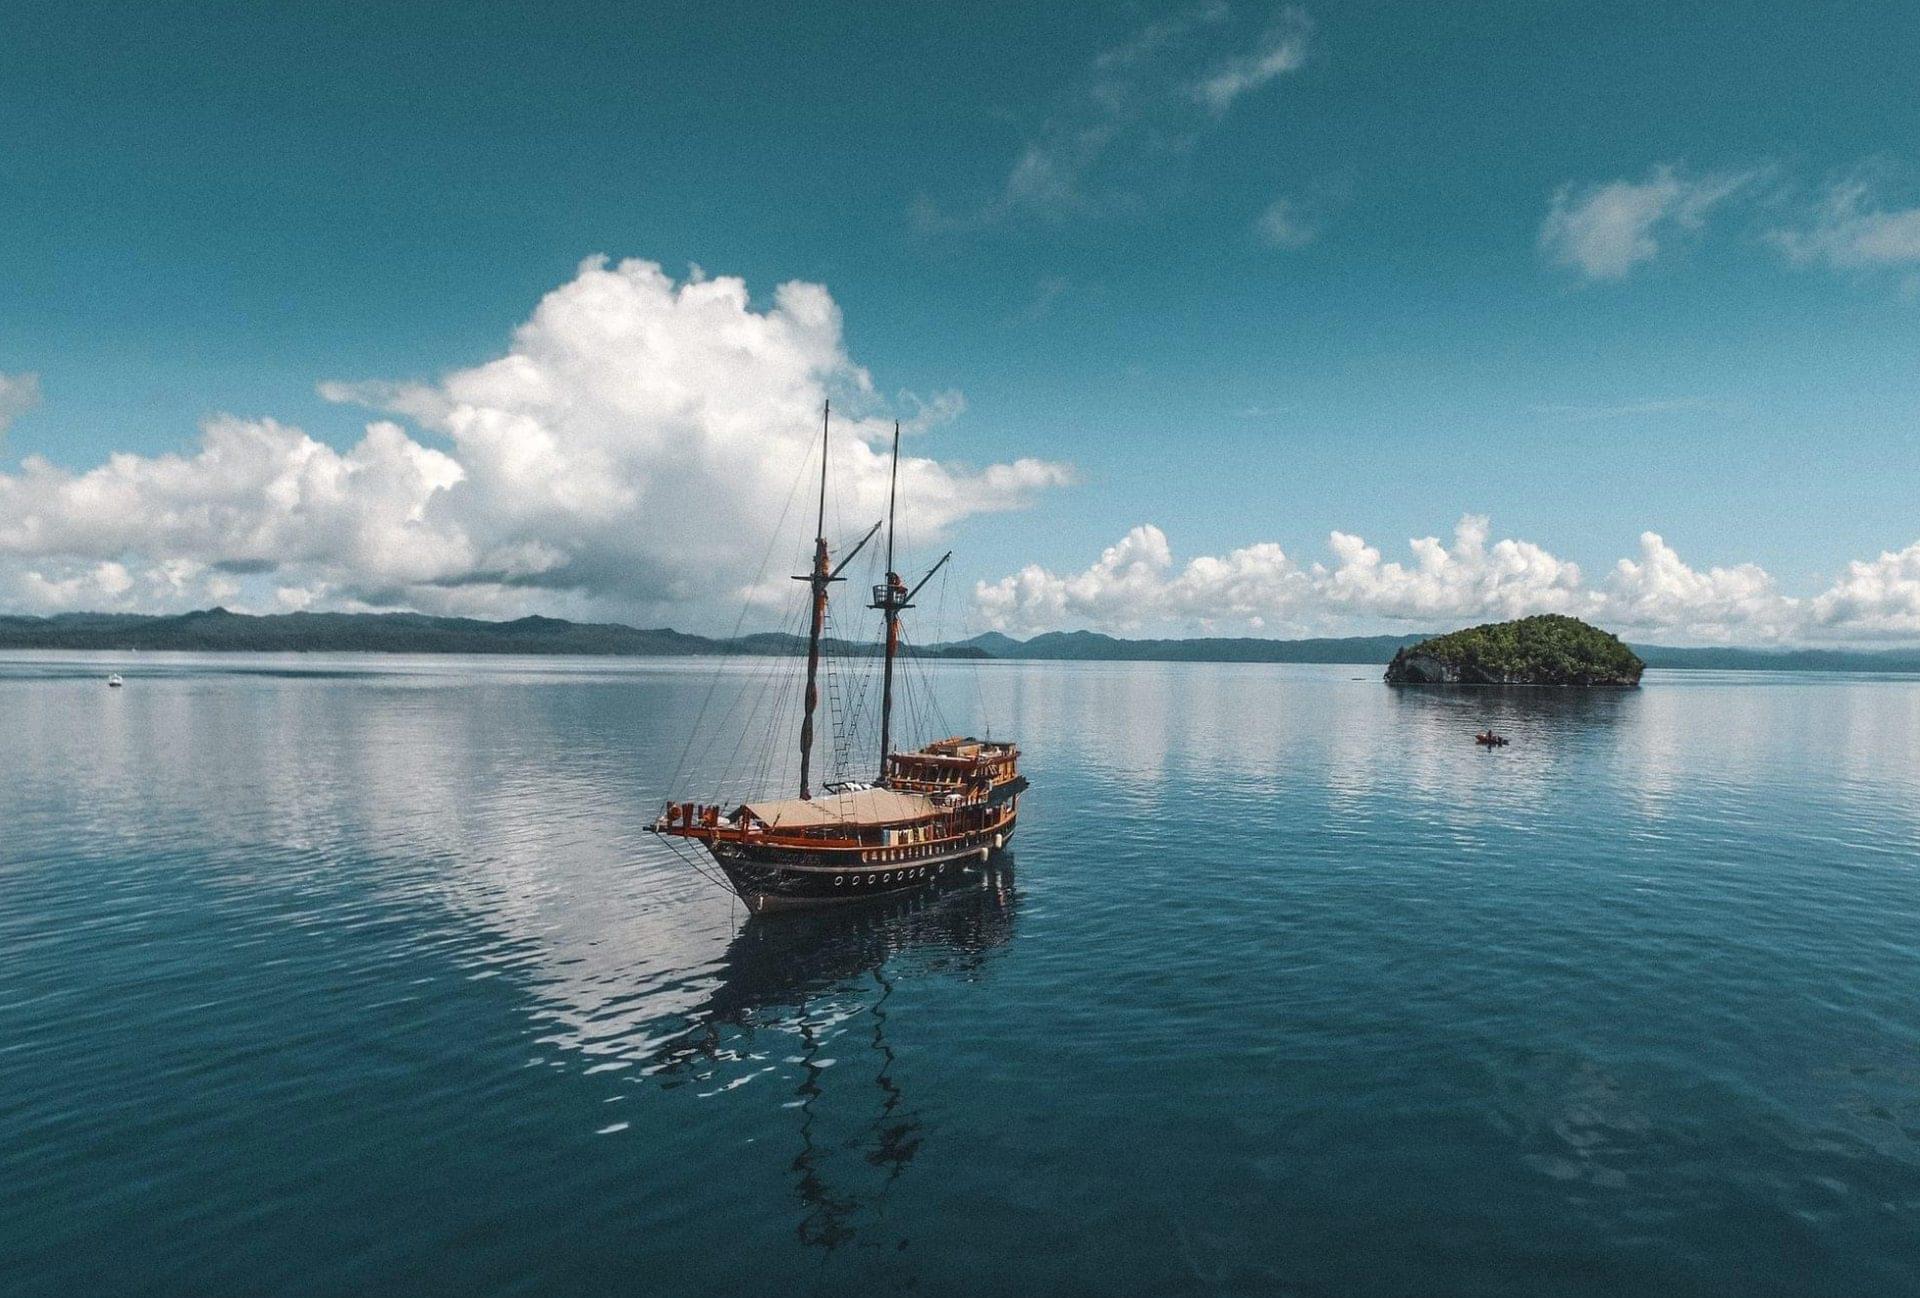 calico jack - one of the best liveaboards in raja ampat